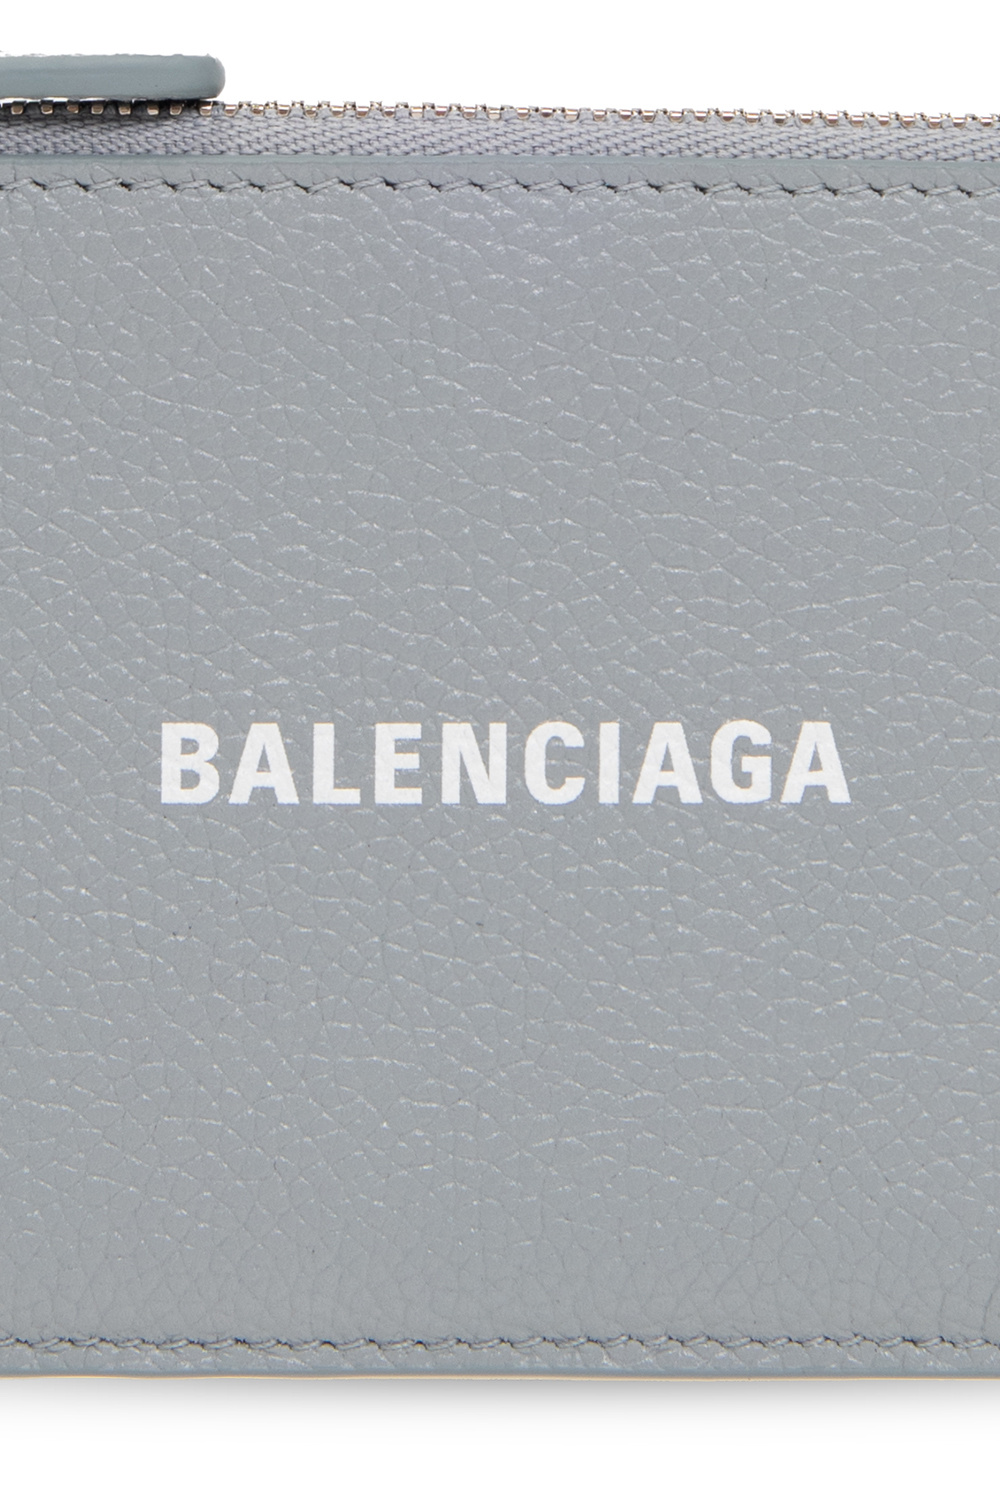 Balenciaga Learn about the details of a project